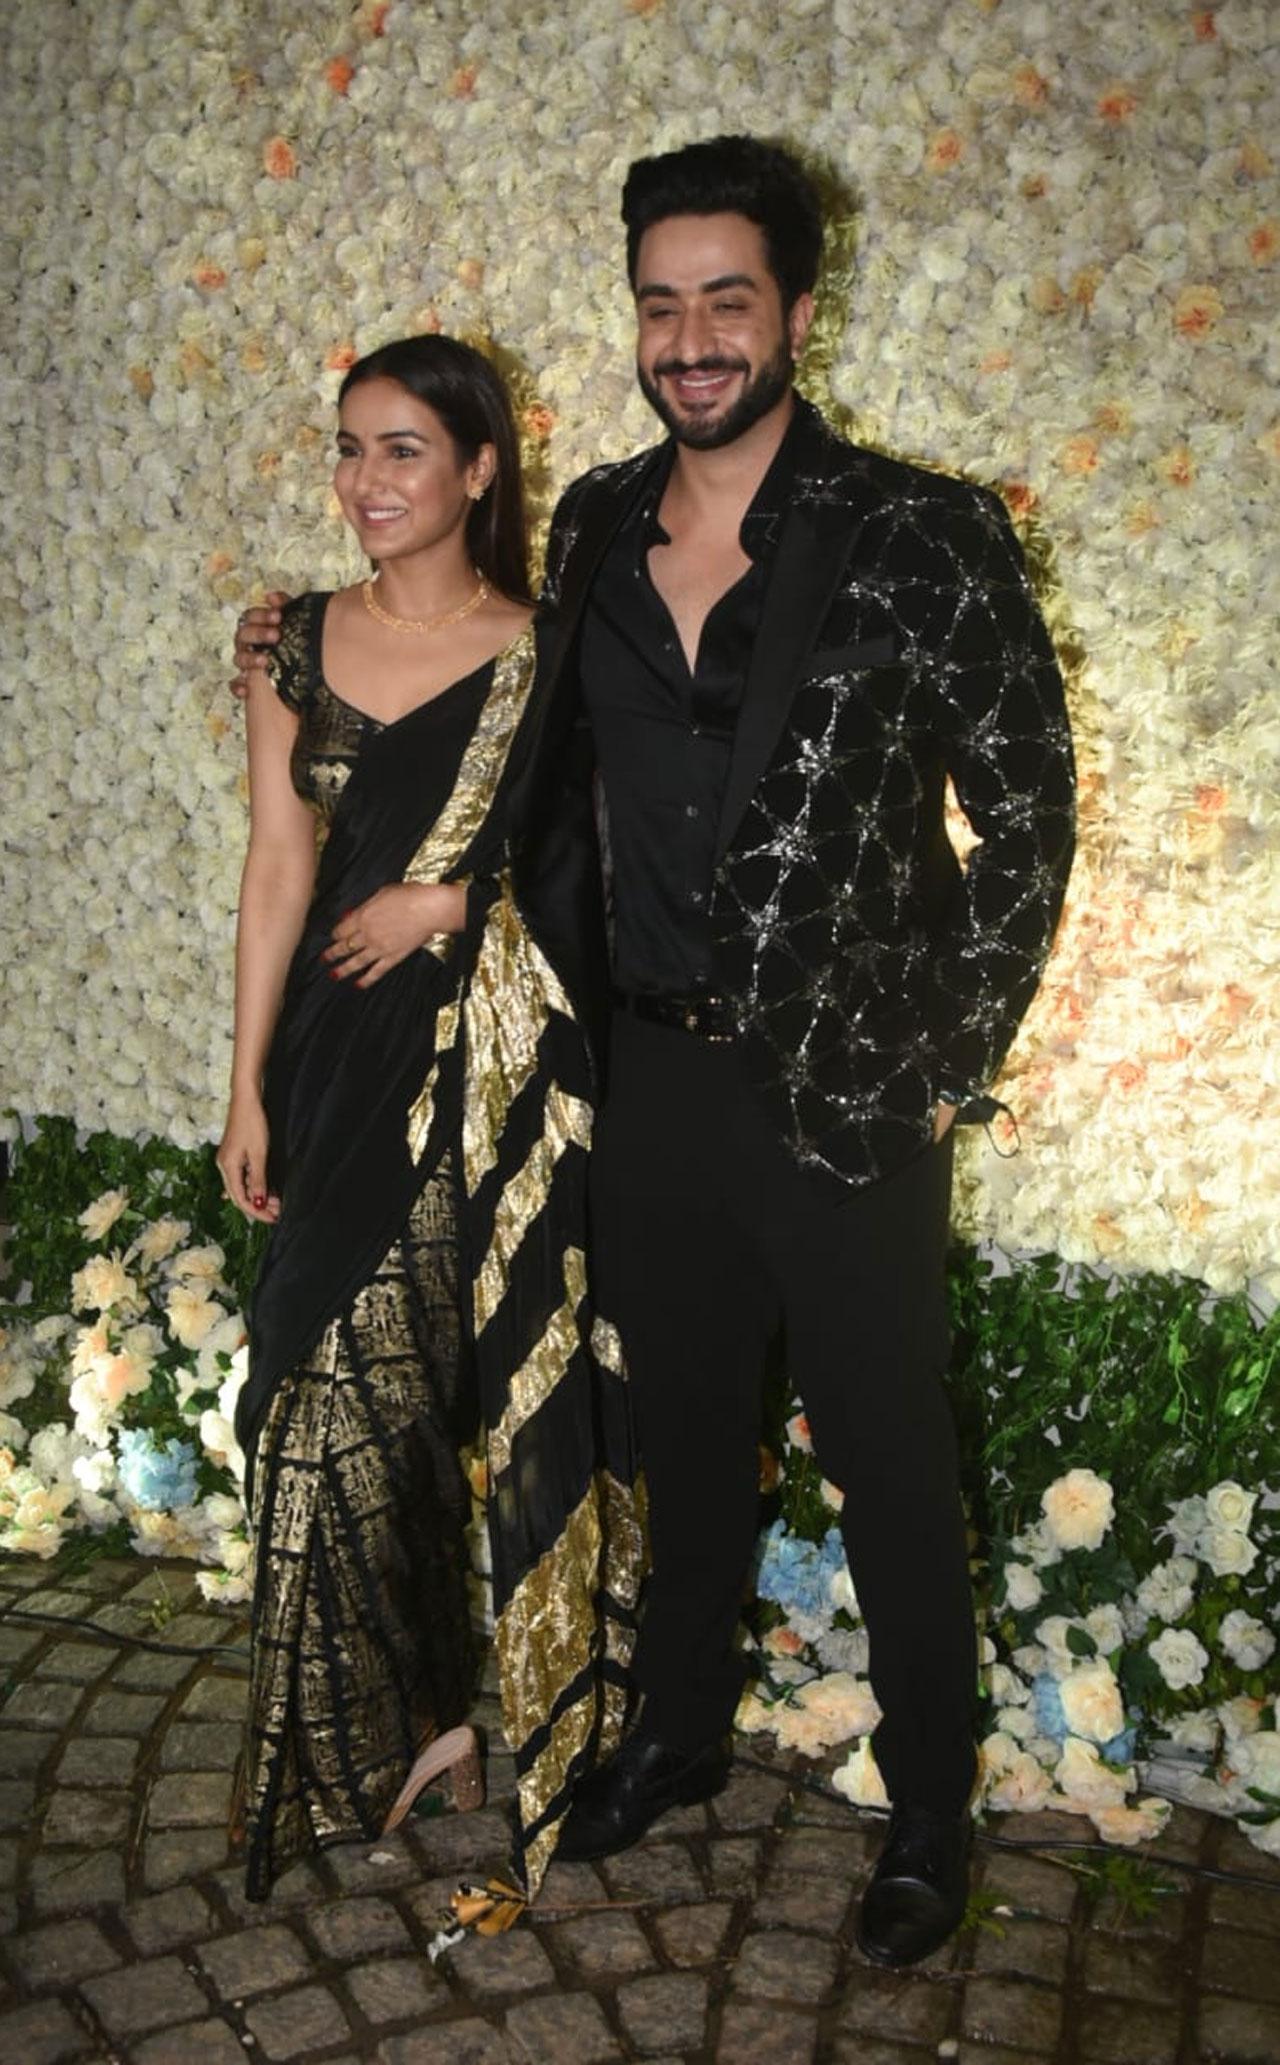 Actor Aly Goni, who's good friends with Anushka Ranjan, was all suited-up for the occsasion and looked his stylish best.